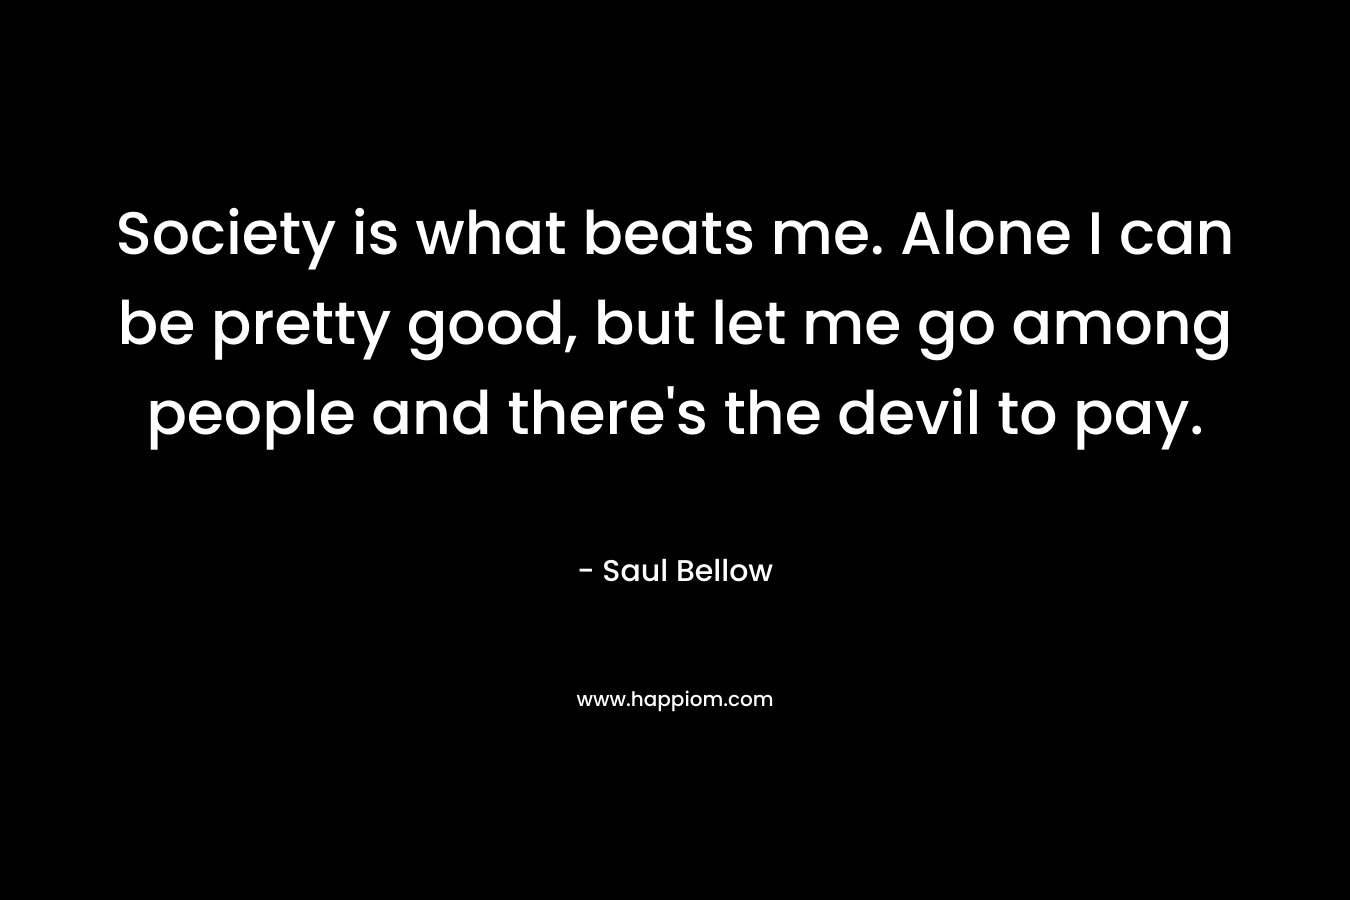 Society is what beats me. Alone I can be pretty good, but let me go among people and there's the devil to pay.